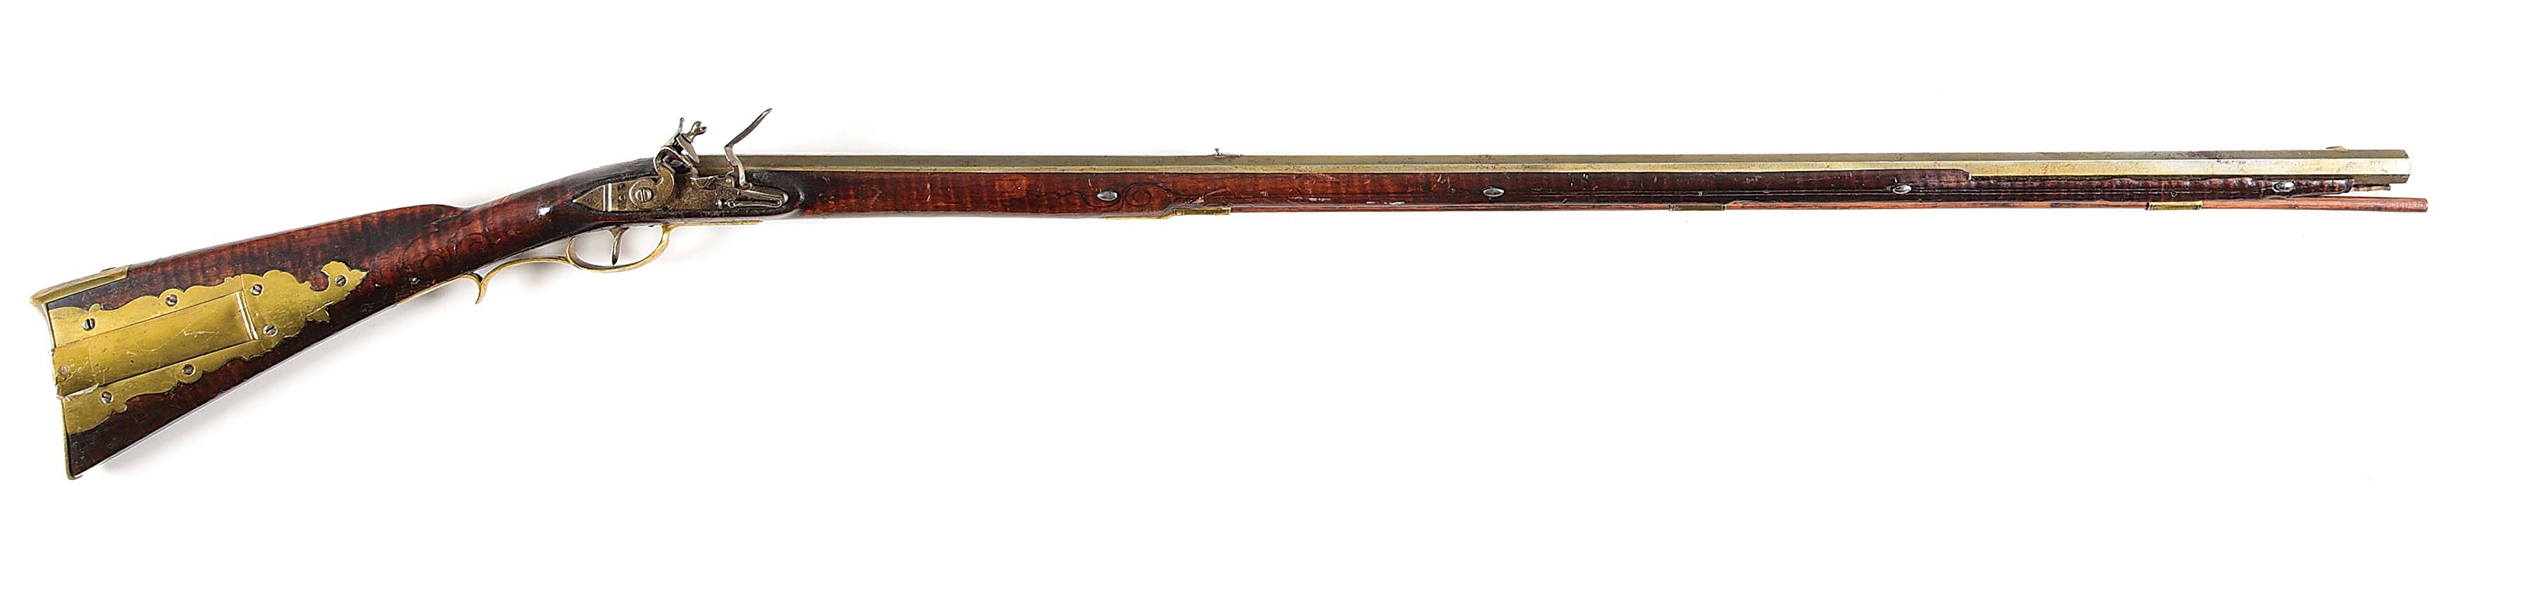 (A) GOLDEN AGE FLINTLOCK KENTUCKY RIFLE ATTRIBUTED TO JACOB SEES.